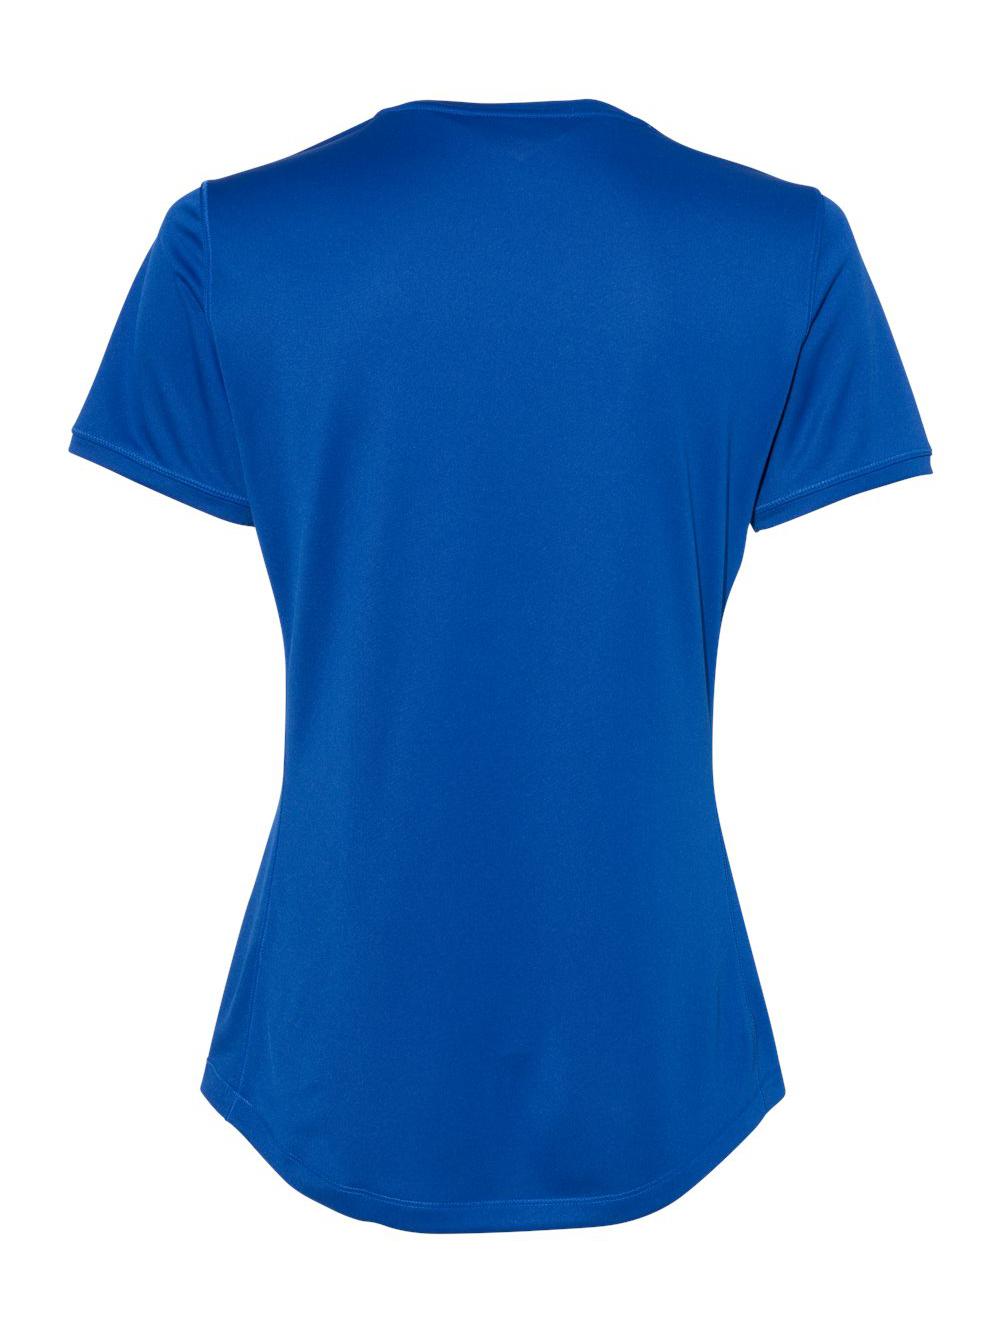 Adidas - Women's Sport T-Shirt - A377 - Collegiate Royal - Size: S - image 3 of 3